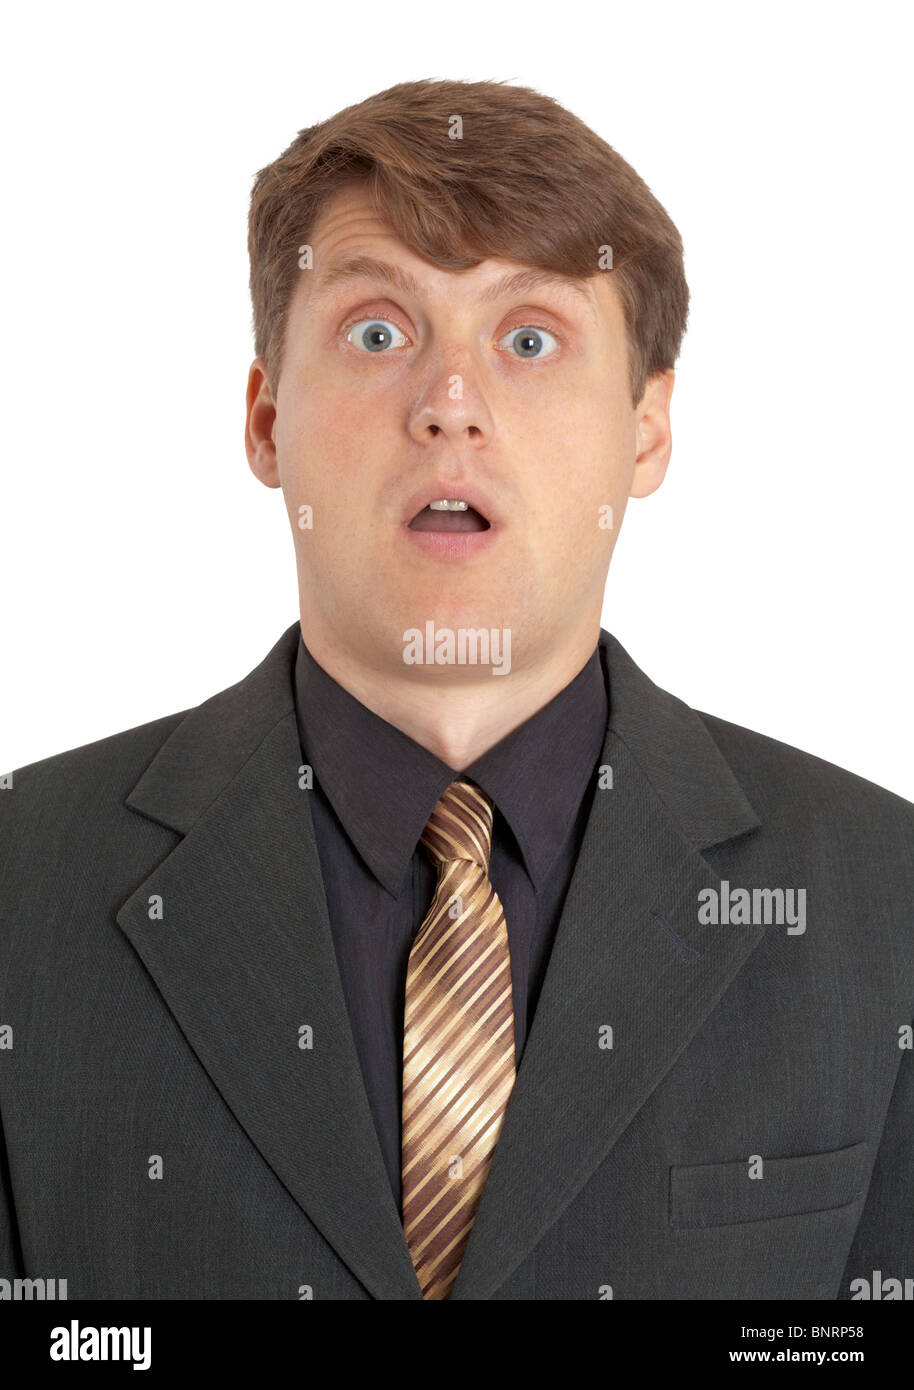 Extremely surprised businessman on white background Stock Photo